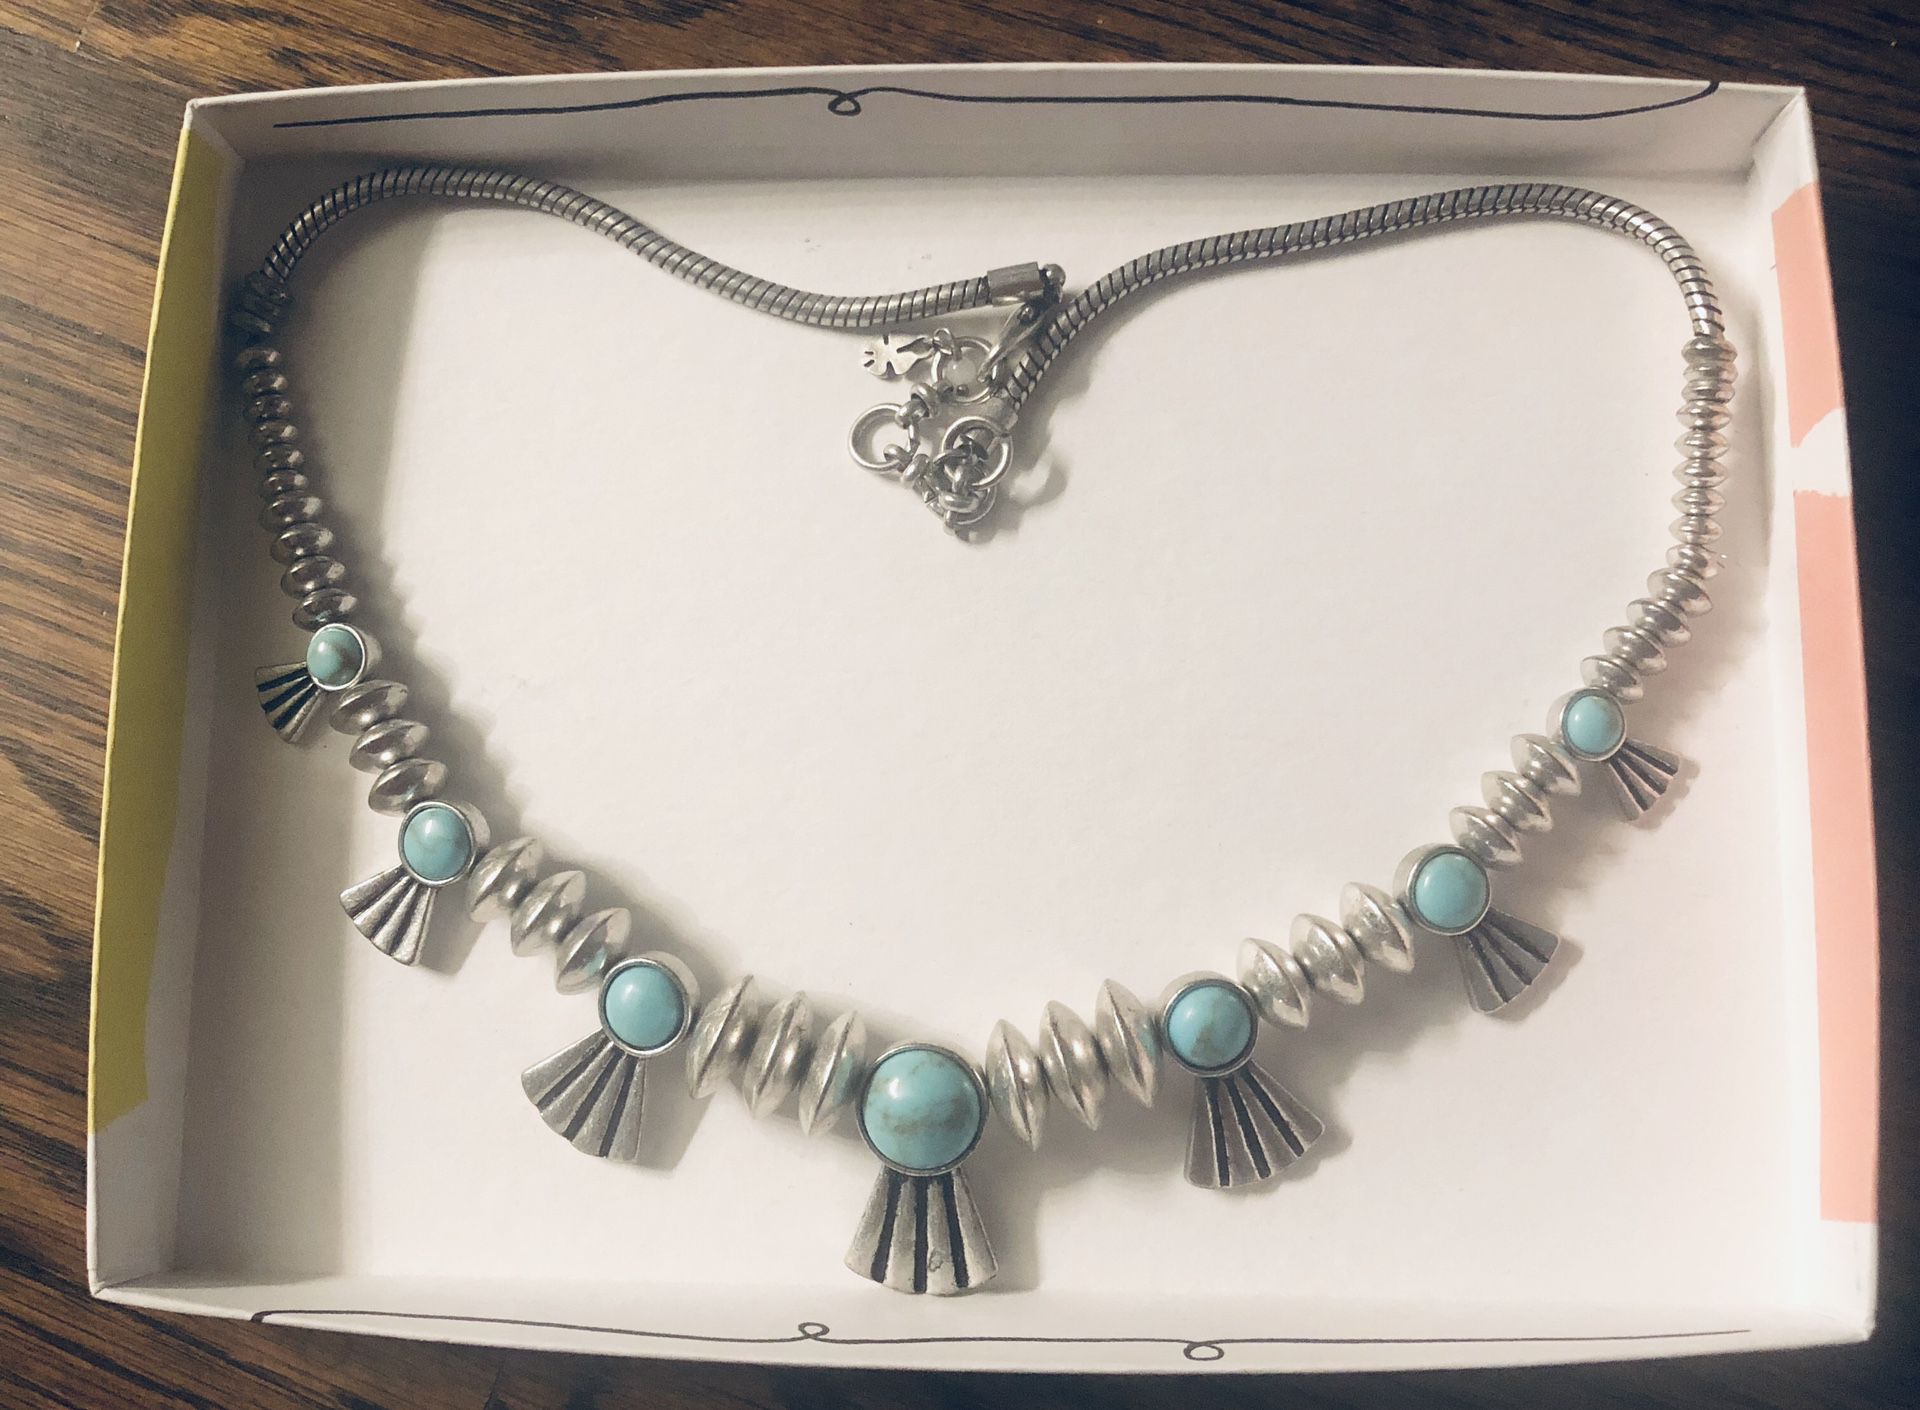 Women’s beautiful silver and turquoise necklace